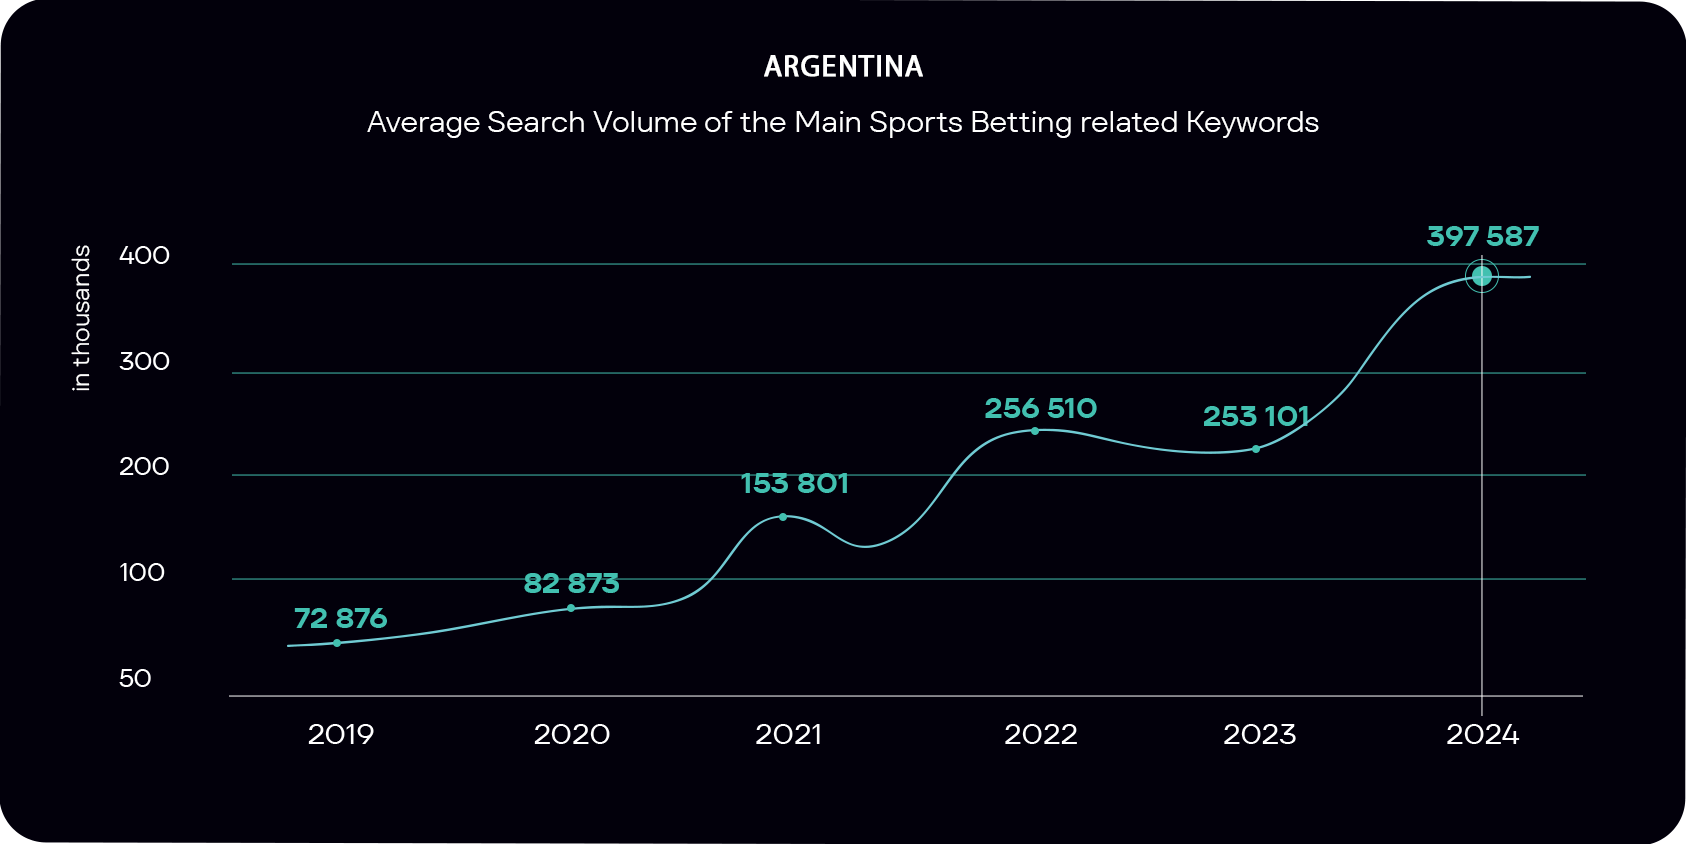 The increase in the use of main sports betting keywords in Argentina